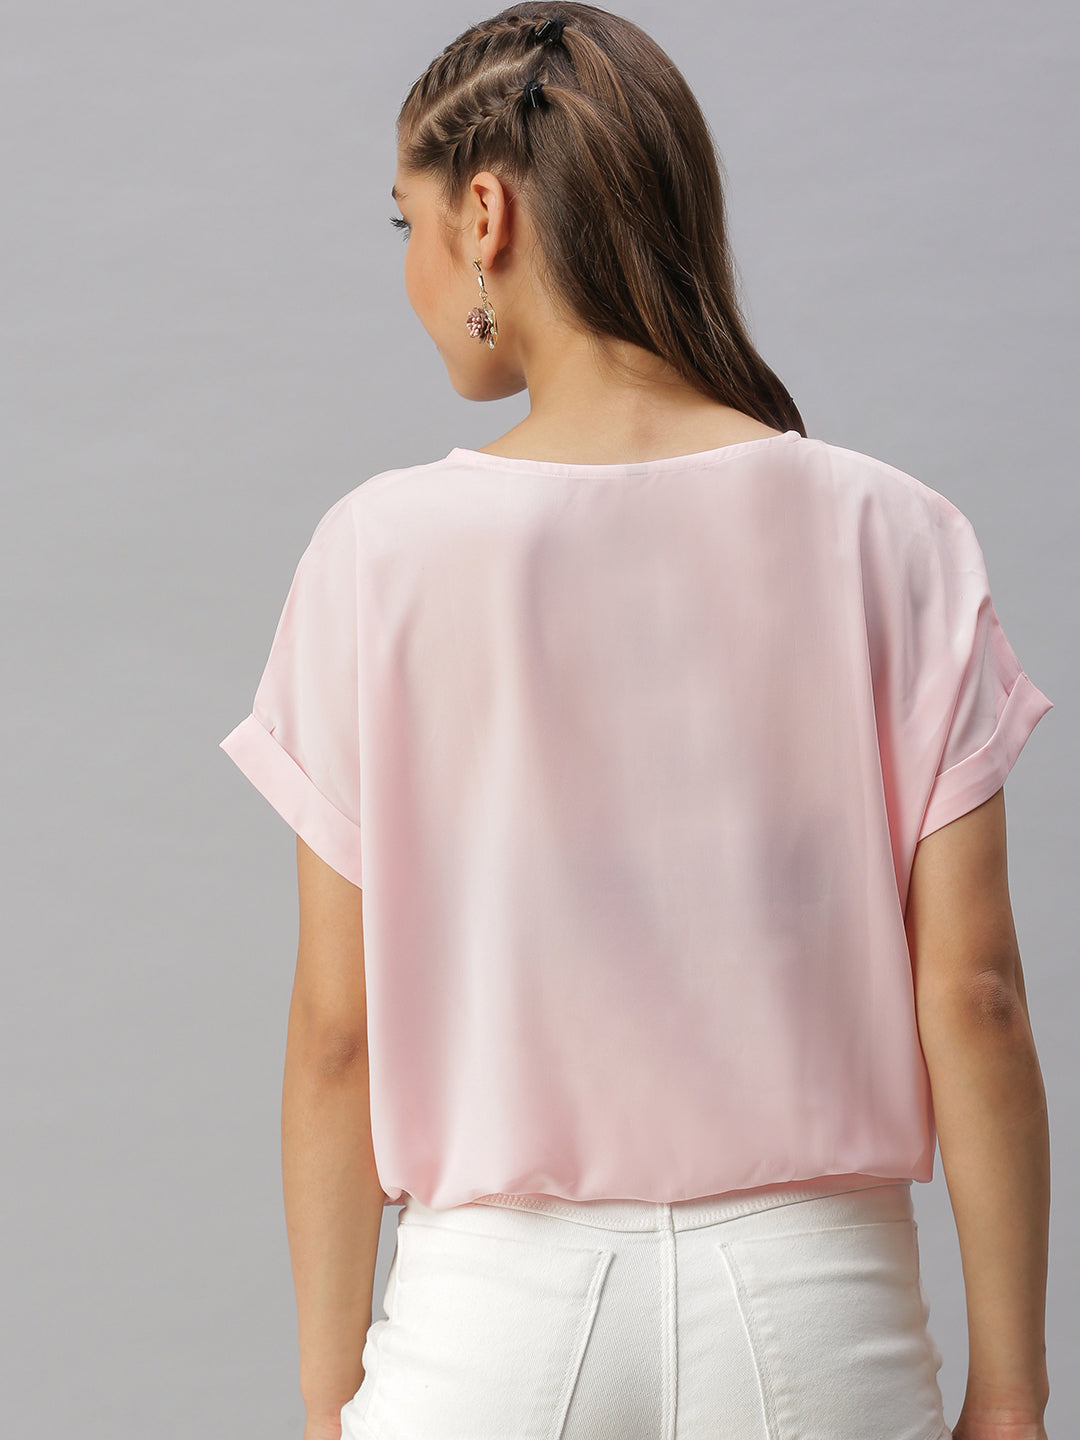 Women Solid Pink Cinched Waist Top